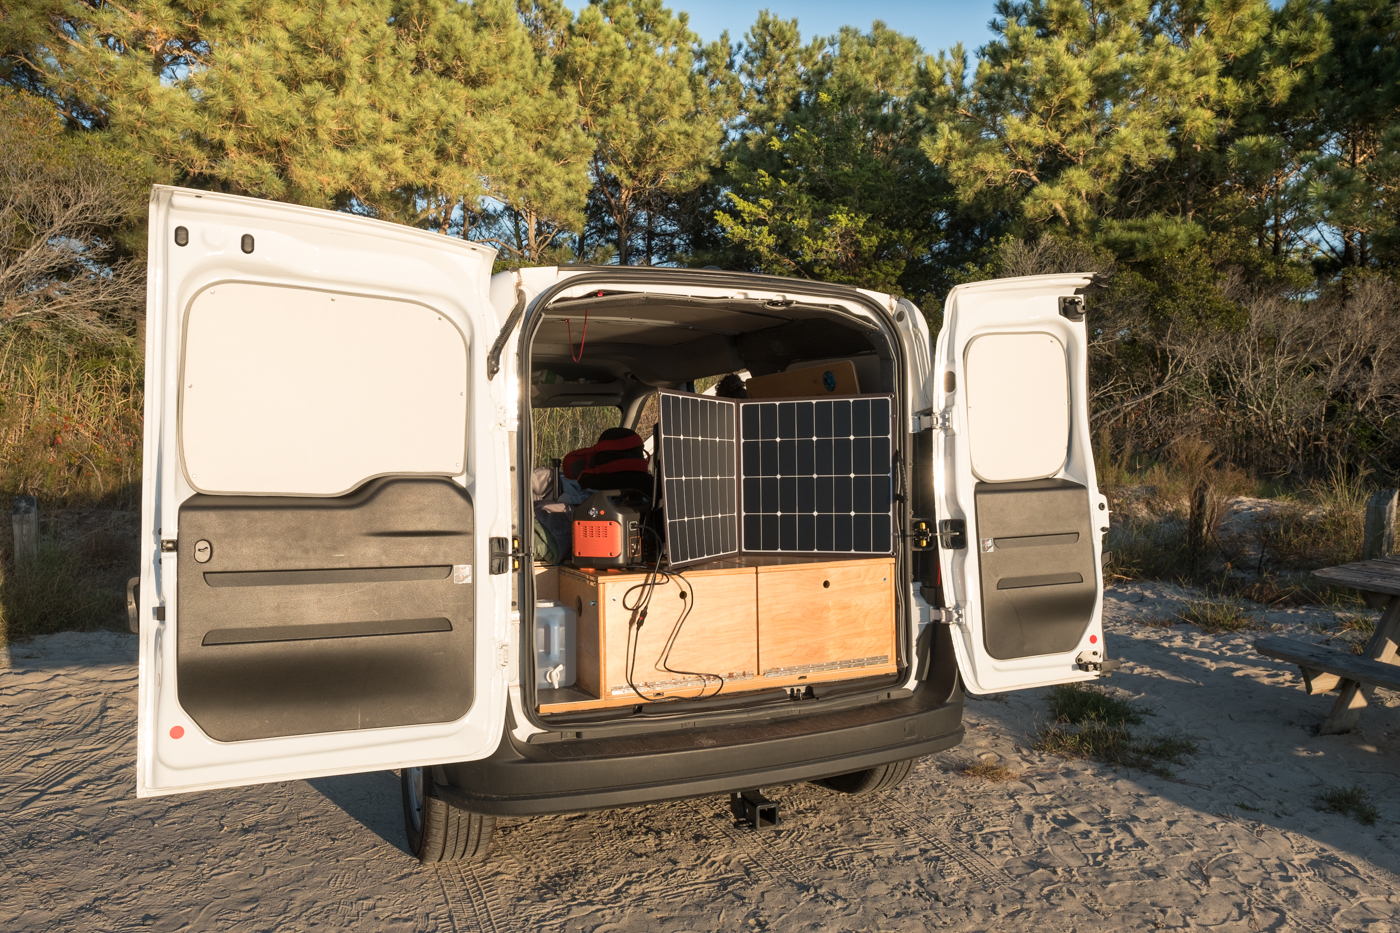 a photo of the backdoors open of a Ram Promaster City van using a Jackery Explorer 500 Portable Power Station and Solar Panel